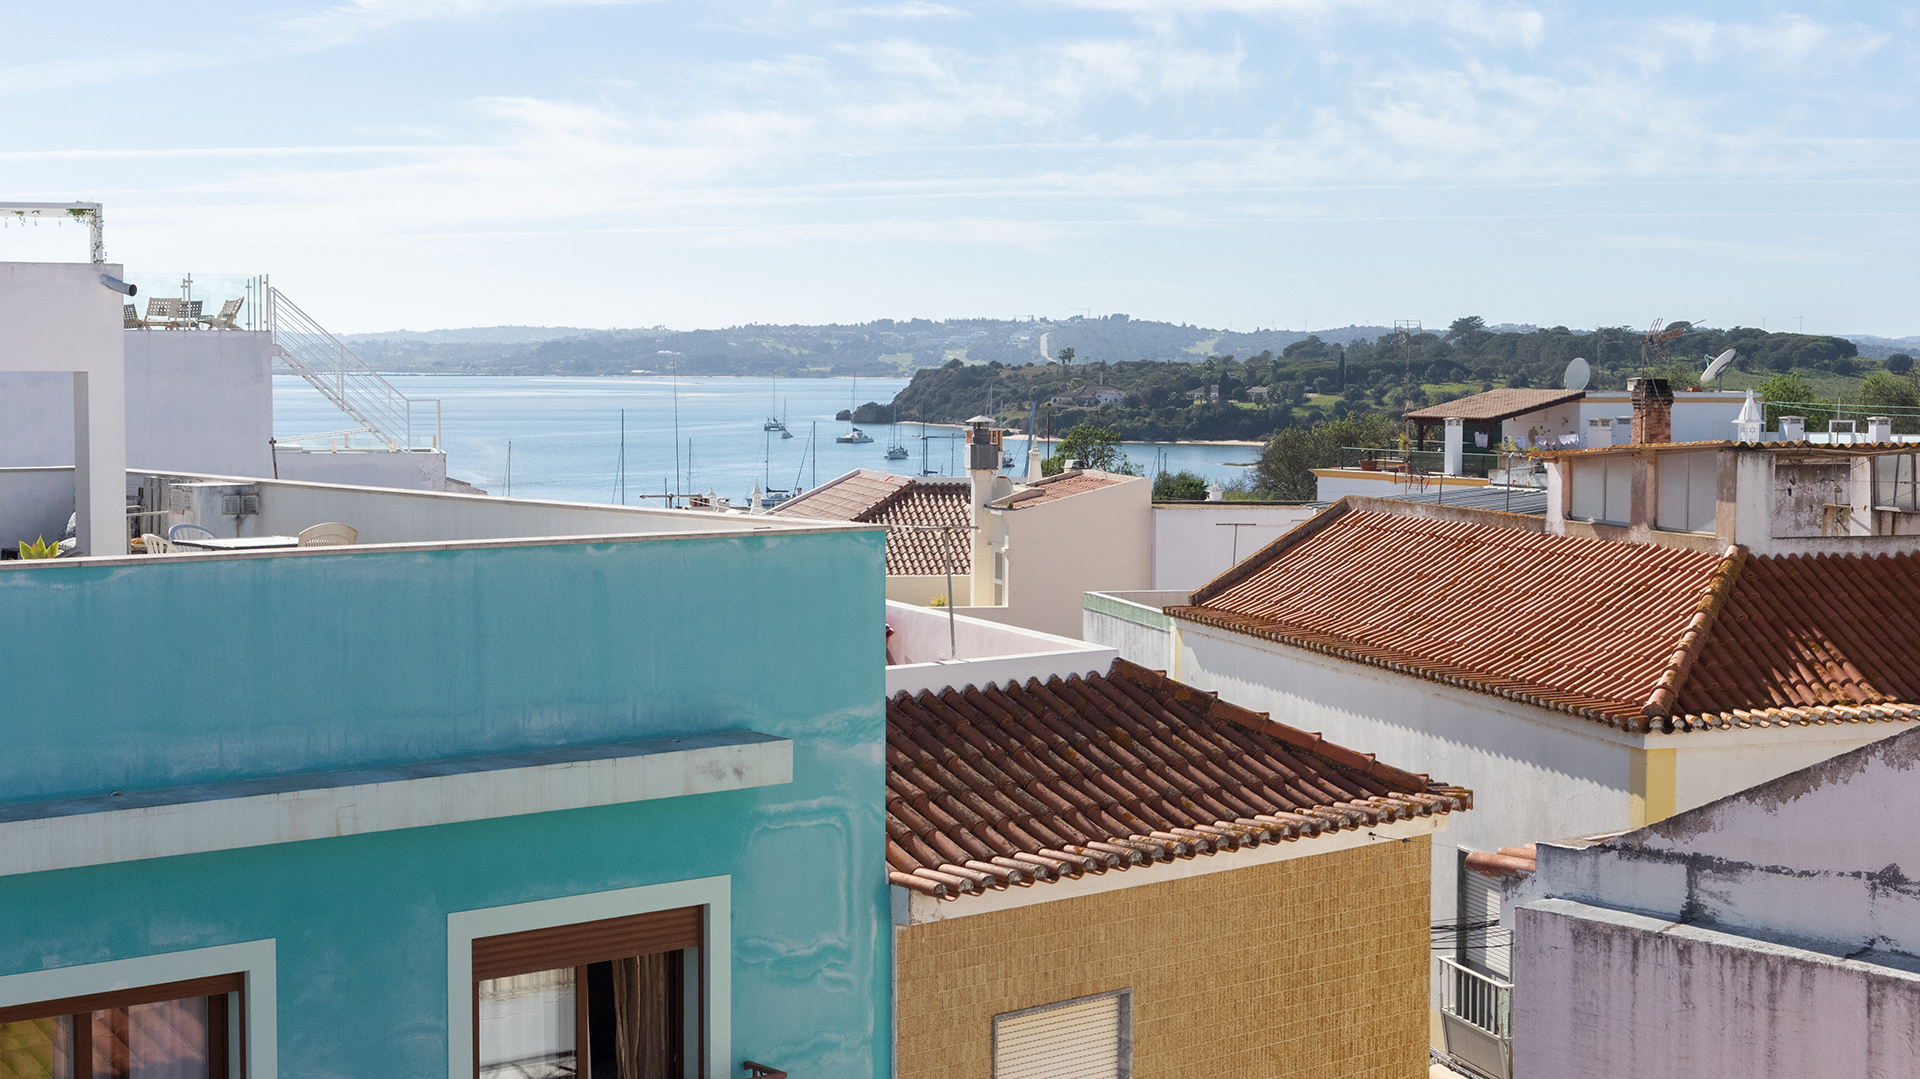 Traditional 3 Bedroom townhouse with large terraces and views, Alvor  | LG2085 Renovated, traditional Portuguese townhouse in the heart of Alvor, with 3 bedrooms and 2 bathrooms and 2 roof terraces offering wonderful views over this beautiful Algarve fishing town.